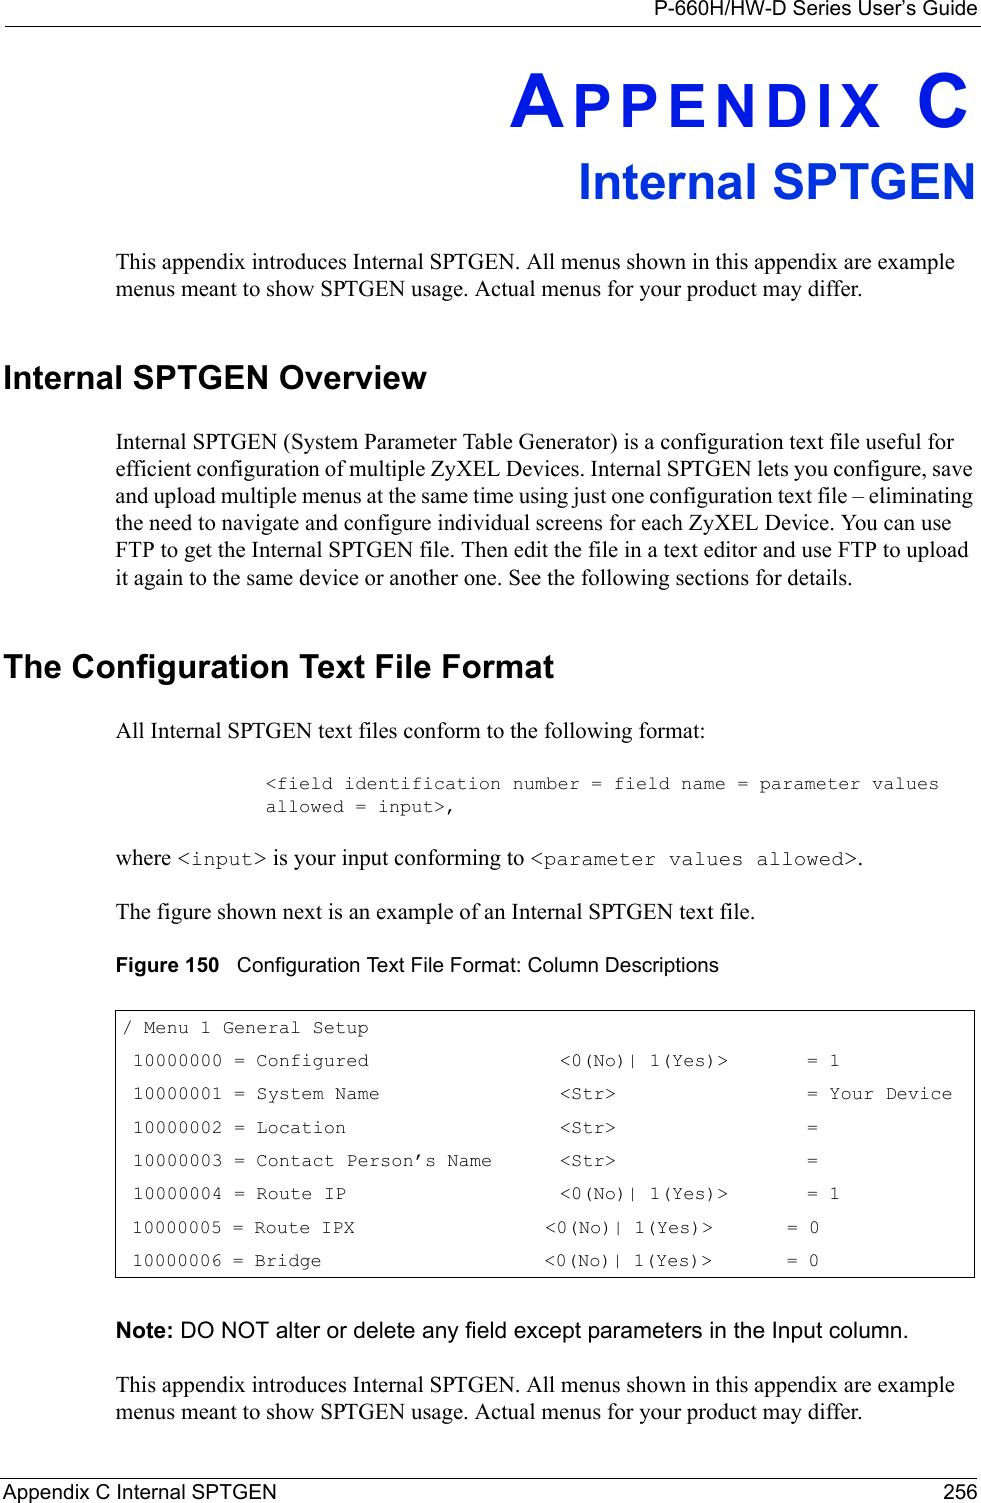 P-660H/HW-D Series User’s GuideAppendix C Internal SPTGEN 256APPENDIX CInternal SPTGENThis appendix introduces Internal SPTGEN. All menus shown in this appendix are example menus meant to show SPTGEN usage. Actual menus for your product may differ.Internal SPTGEN OverviewInternal SPTGEN (System Parameter Table Generator) is a configuration text file useful for efficient configuration of multiple ZyXEL Devices. Internal SPTGEN lets you configure, save and upload multiple menus at the same time using just one configuration text file – eliminating the need to navigate and configure individual screens for each ZyXEL Device. You can use FTP to get the Internal SPTGEN file. Then edit the file in a text editor and use FTP to upload it again to the same device or another one. See the following sections for details. The Configuration Text File FormatAll Internal SPTGEN text files conform to the following format:&lt;field identification number = field name = parameter values allowed = input&gt;,where &lt;input&gt; is your input conforming to &lt;parameter values allowed&gt;. The figure shown next is an example of an Internal SPTGEN text file.Figure 150   Configuration Text File Format: Column DescriptionsNote: DO NOT alter or delete any field except parameters in the Input column. This appendix introduces Internal SPTGEN. All menus shown in this appendix are example menus meant to show SPTGEN usage. Actual menus for your product may differ./ Menu 1 General Setup     10000000 = Configured                 &lt;0(No)| 1(Yes)&gt;       = 1     10000001 = System Name                &lt;Str&gt;                 = Your Device 10000002 = Location                   &lt;Str&gt;                 =      10000003 = Contact Person’s Name      &lt;Str&gt;                 =      10000004 = Route IP                   &lt;0(No)| 1(Yes)&gt;       = 1     10000005 = Route IPX                  &lt;0(No)| 1(Yes)&gt;       = 0               10000006 = Bridge                     &lt;0(No)| 1(Yes)&gt;       = 0              